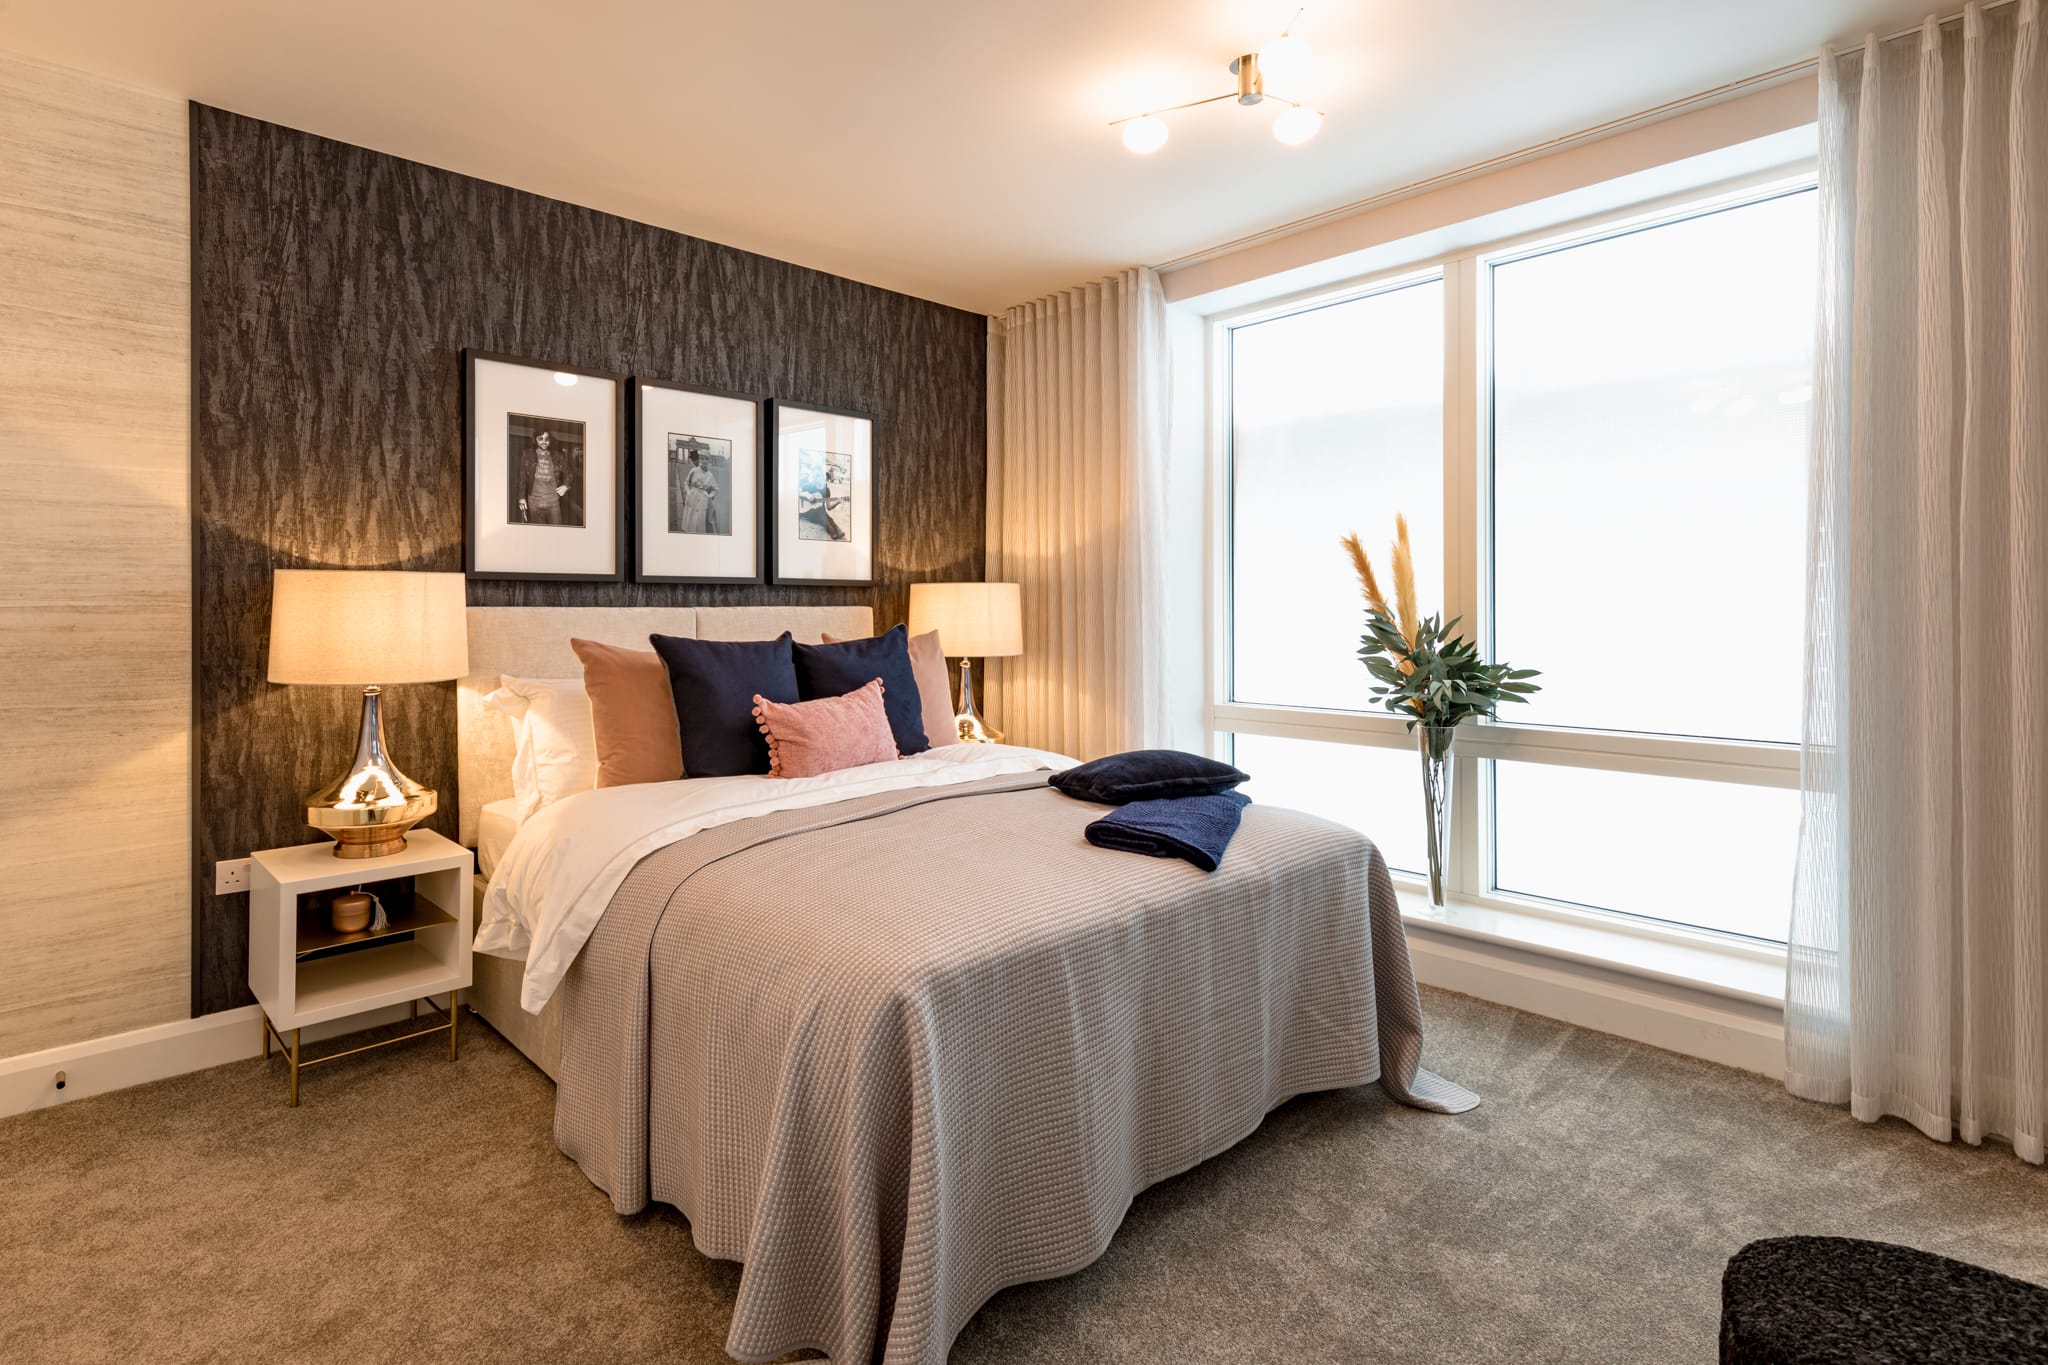 Internal image of a bedroom at The Folium development by Catalyst - available to purchase through Shared Ownership on Share to Buy!